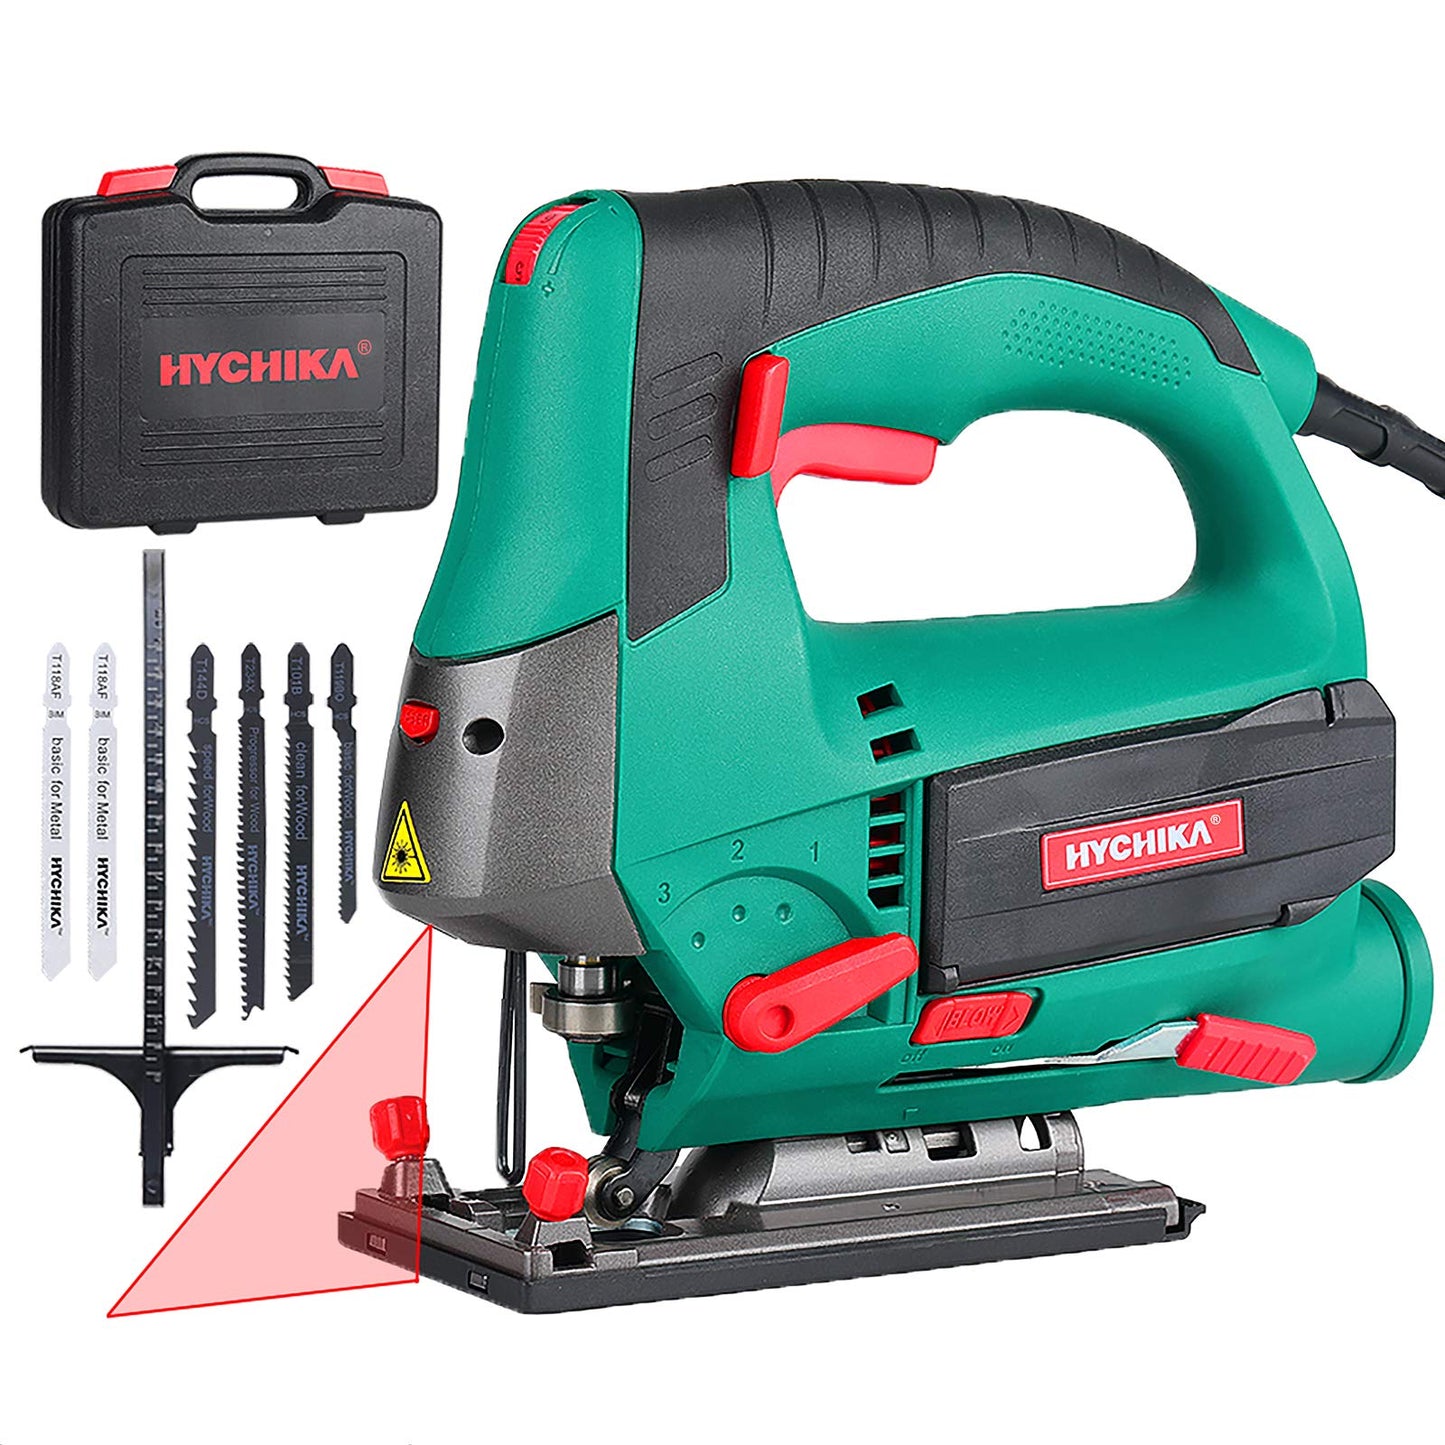 HYCHIKA Jigsaw, 6.7A Jig Saw 800-3000SPM with 6 Variable Speeds, 4 Orbital Sets, Bevel Angle 45°, 6PCS Blades, Pure Copper Motor, Laser Guide,